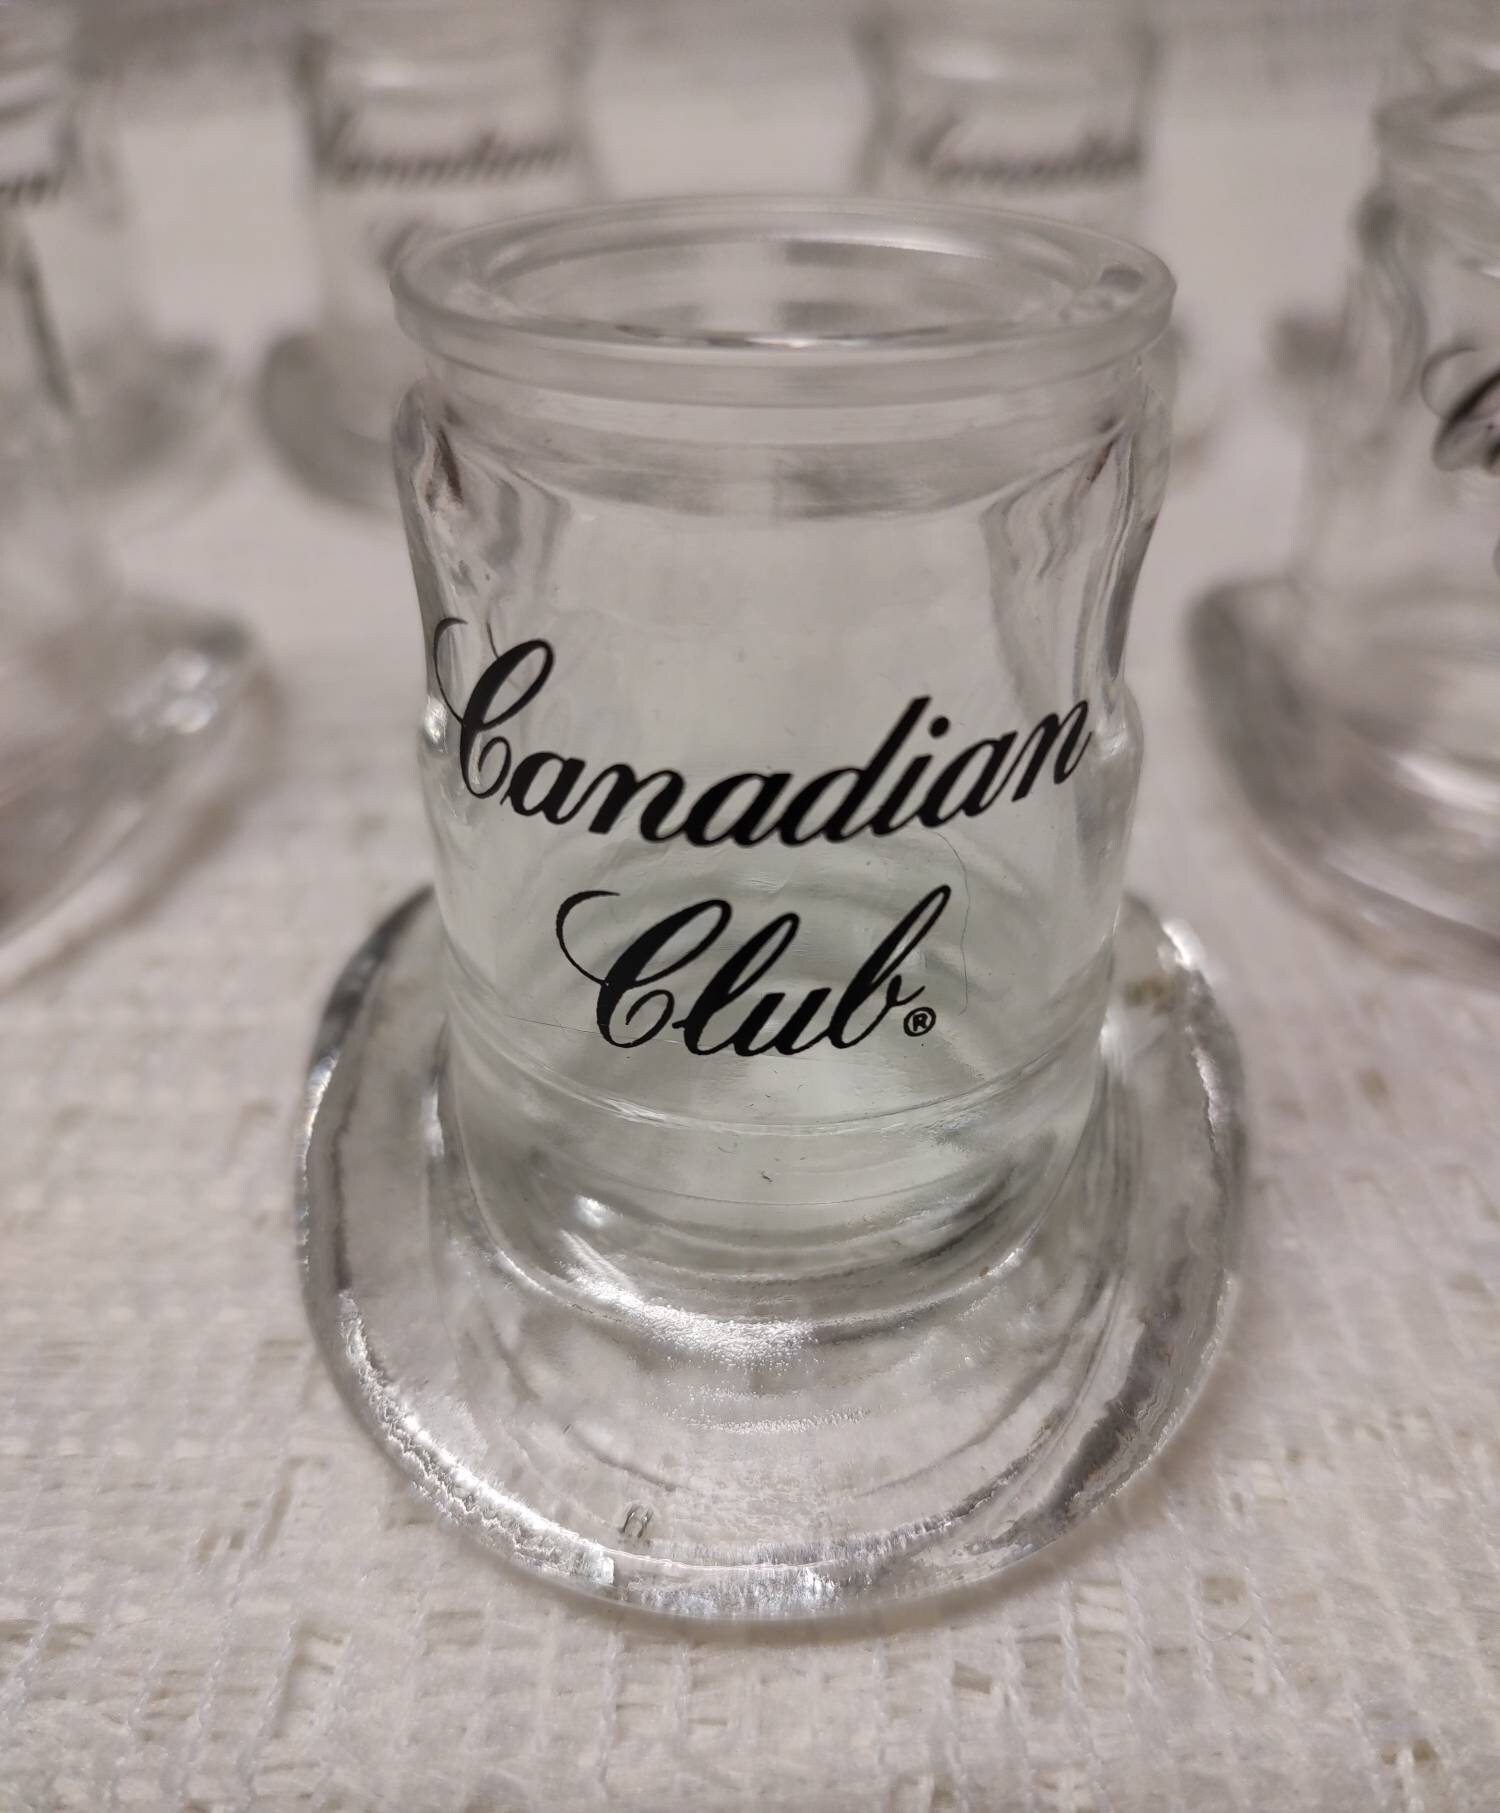 Vintage Whiskey Glass Set Canadian Club Classic Aged 12 Years